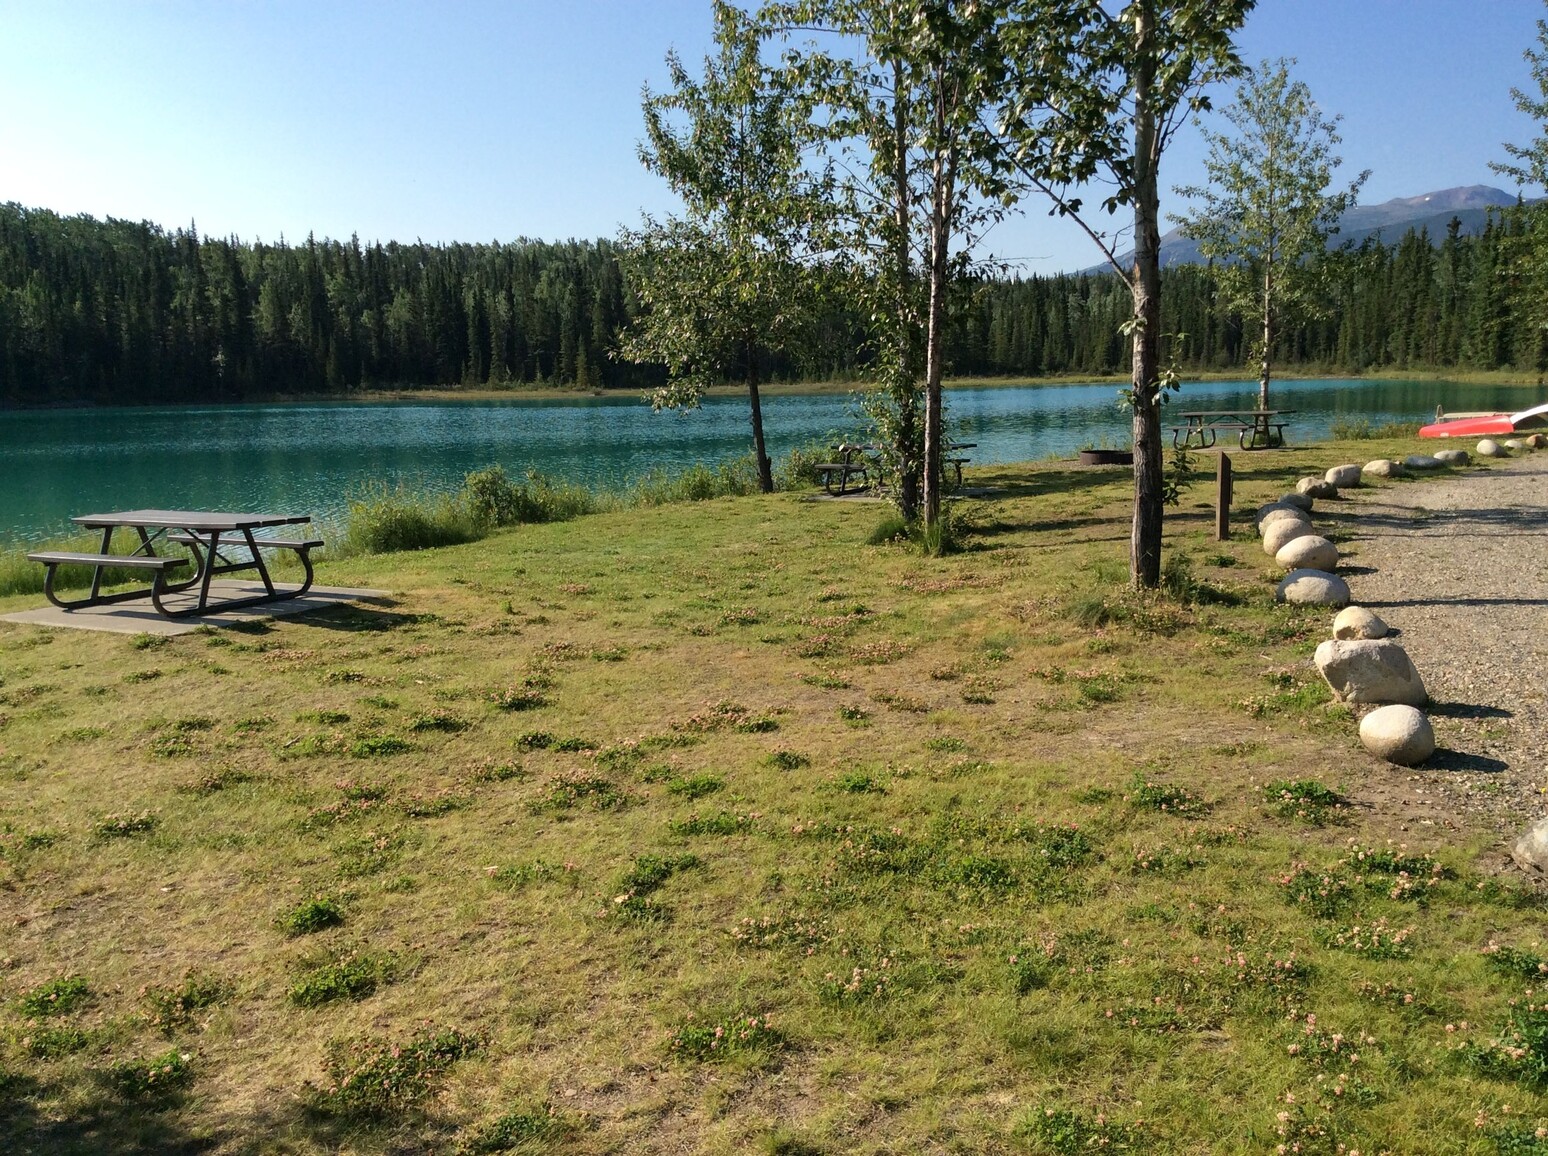 Grassy day use area with picnic tables and a few trees on the edge of the lake. Canoes on the beach in the background. Blue lake and forested mountains in the distance.